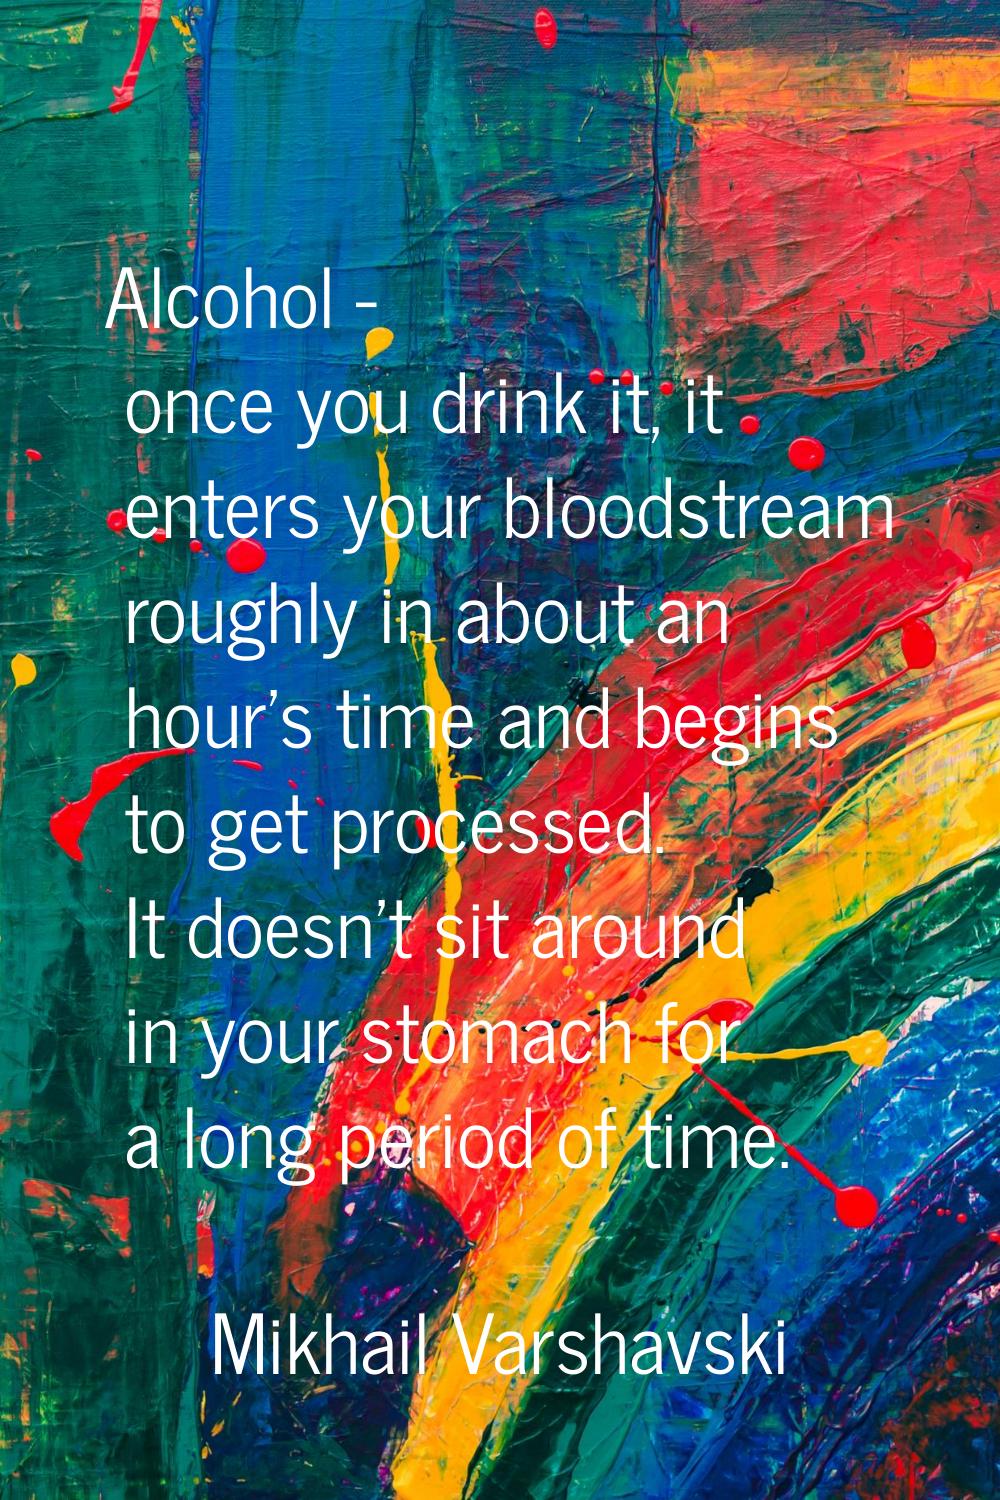 Alcohol - once you drink it, it enters your bloodstream roughly in about an hour's time and begins 